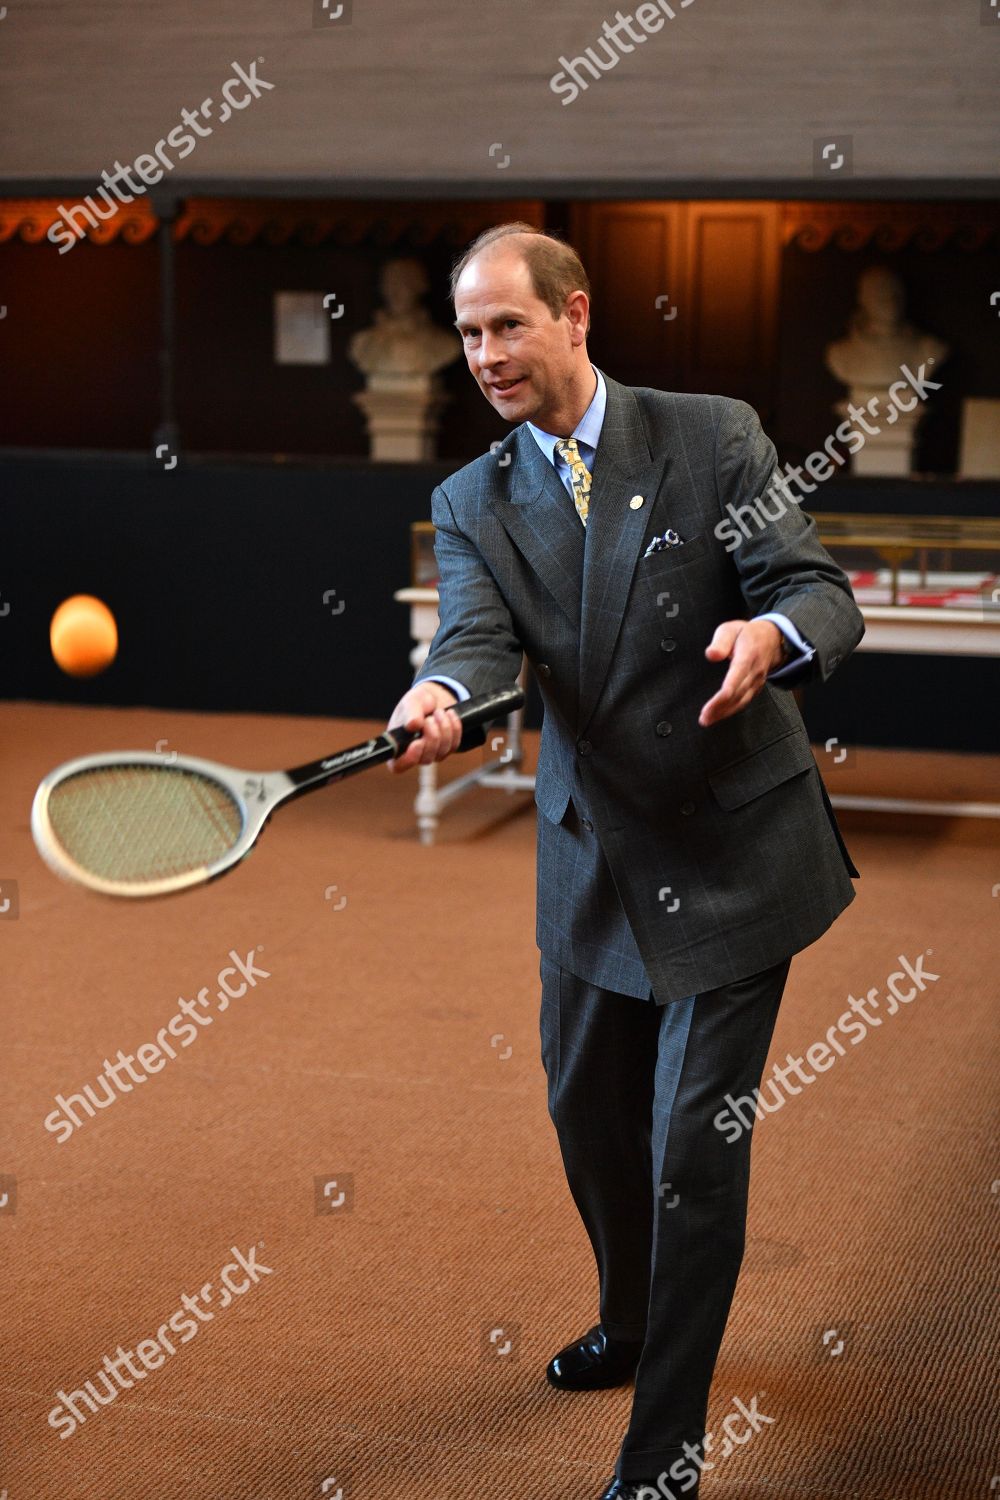 prince-edward-and-sophie-countess-of-wessex-visit-to-paris-france-shutterstock-editorial-9907868b.jpg